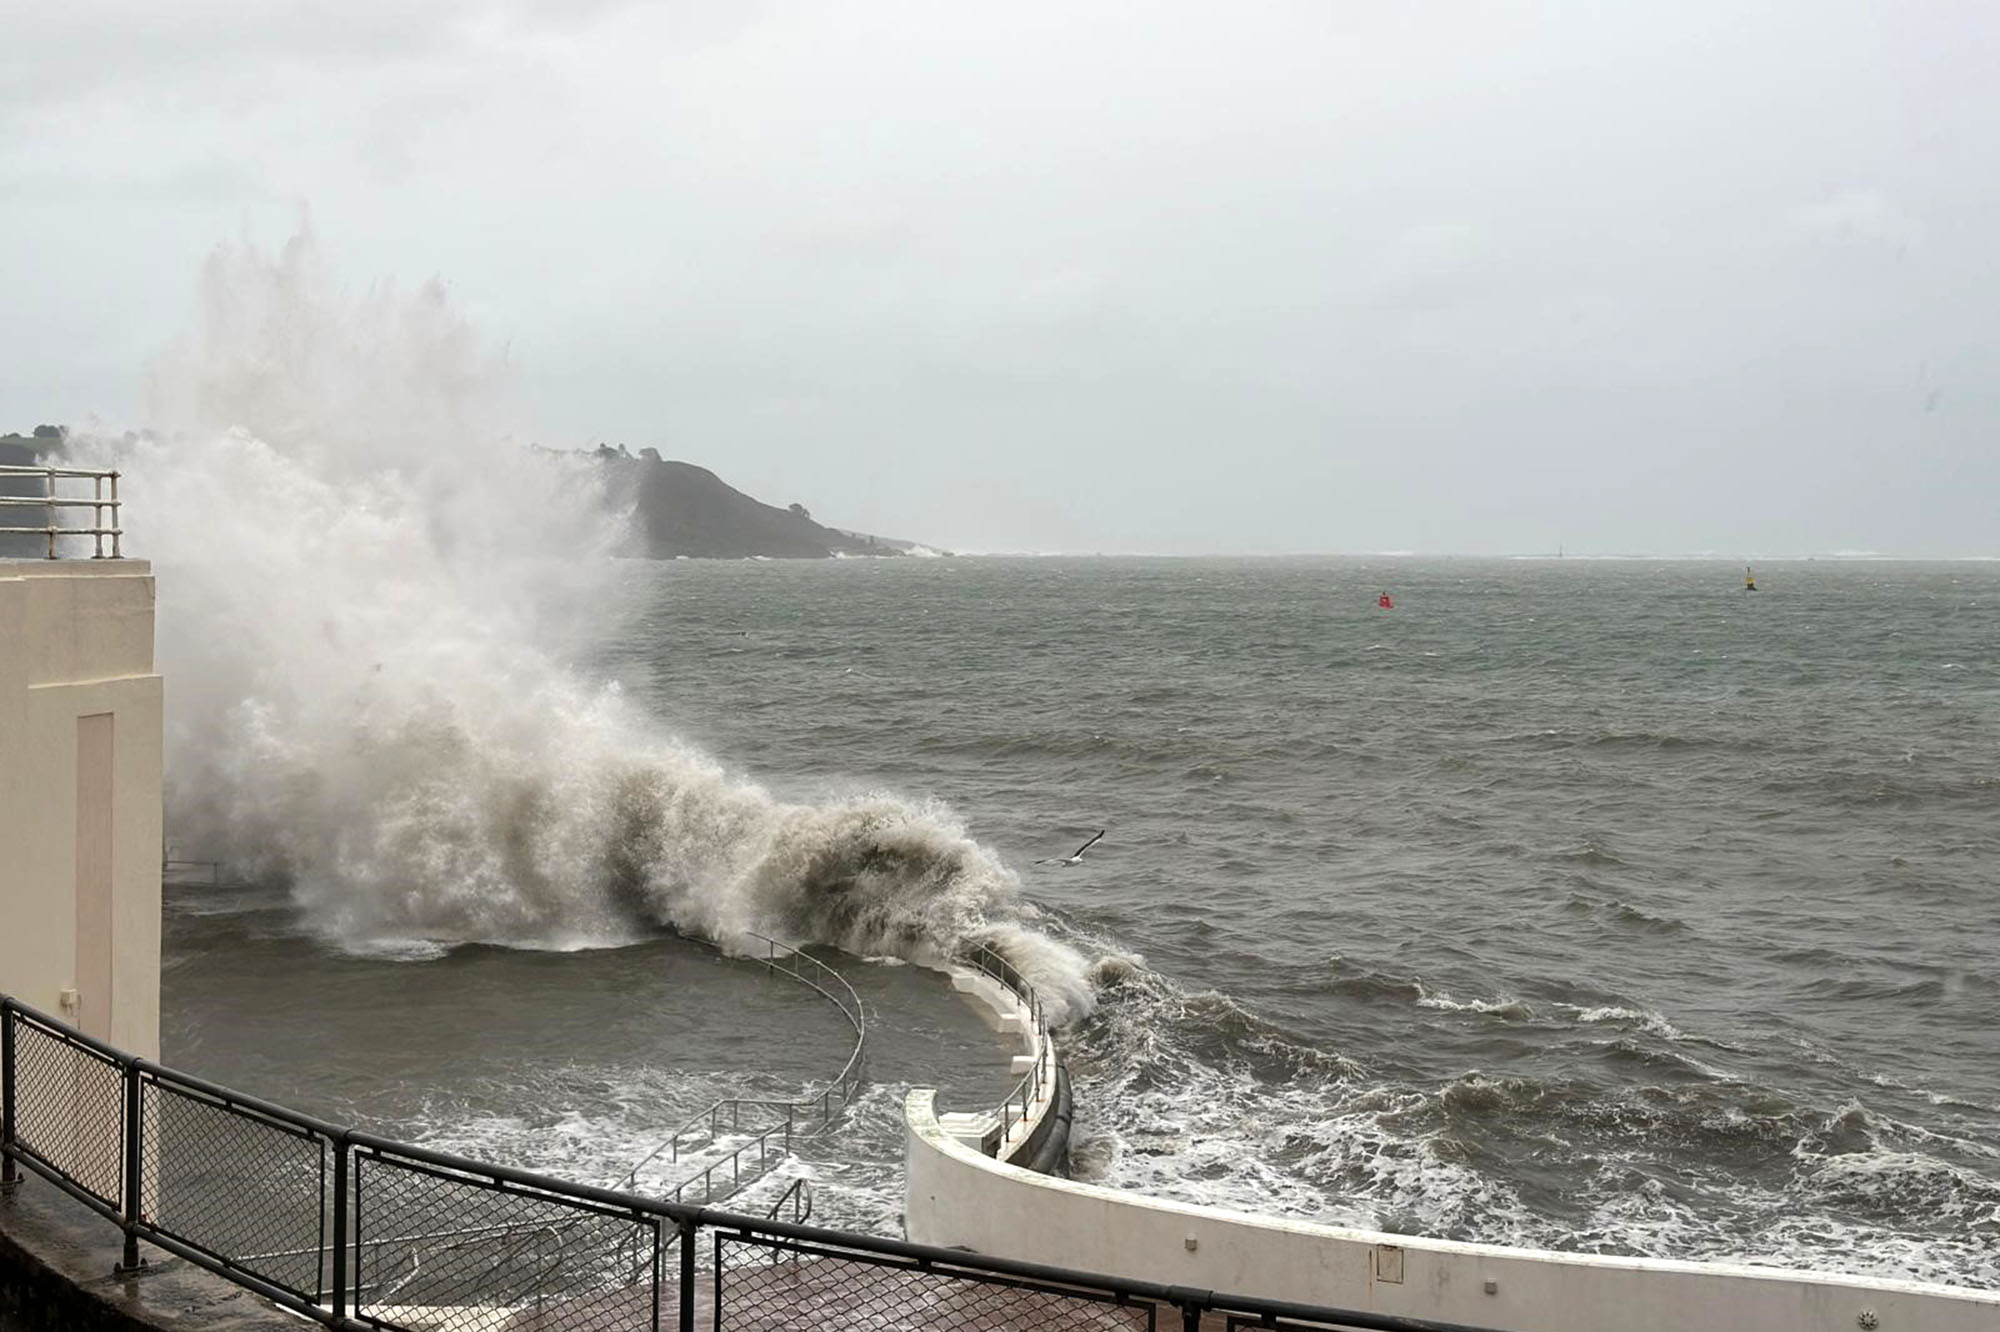 Stormy conditions at Tinside Lido, Plymouth | Brian Mercer via Lee Merchant